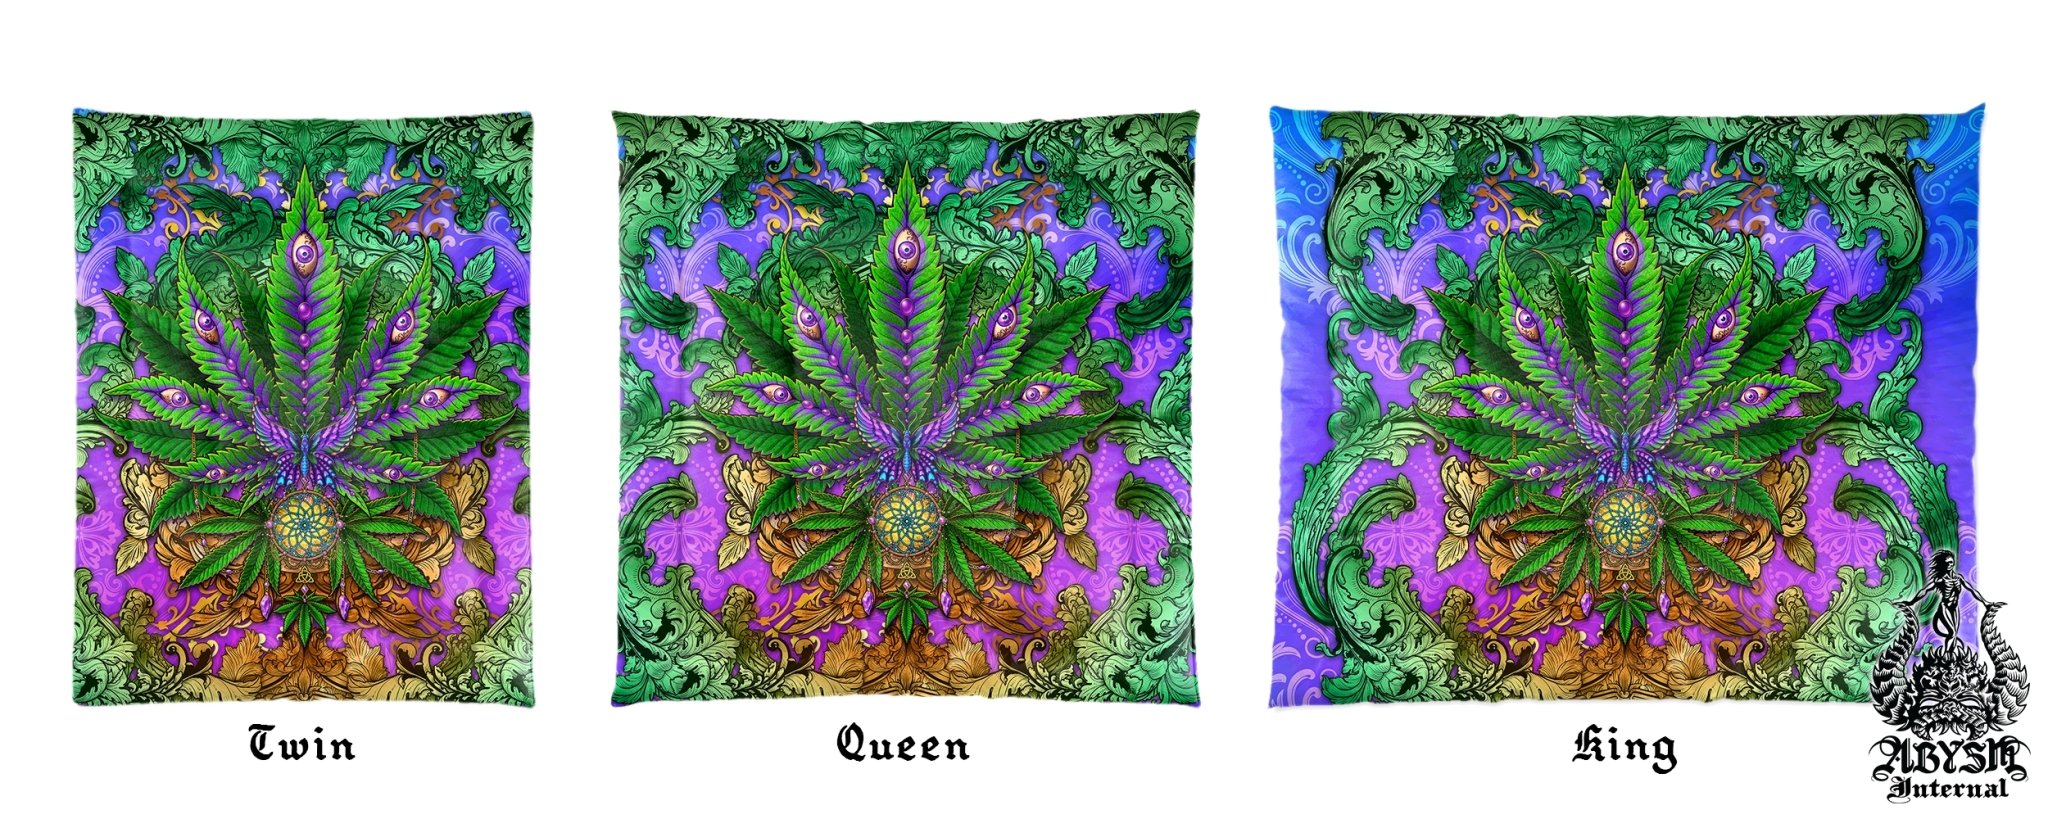 Weed Bedding Set, Comforter and Duvet, Cannabis Bed Cover, Marijuana Bedroom Decor, King, Queen and Twin Size, 420 Room Art - Nature - Abysm Internal